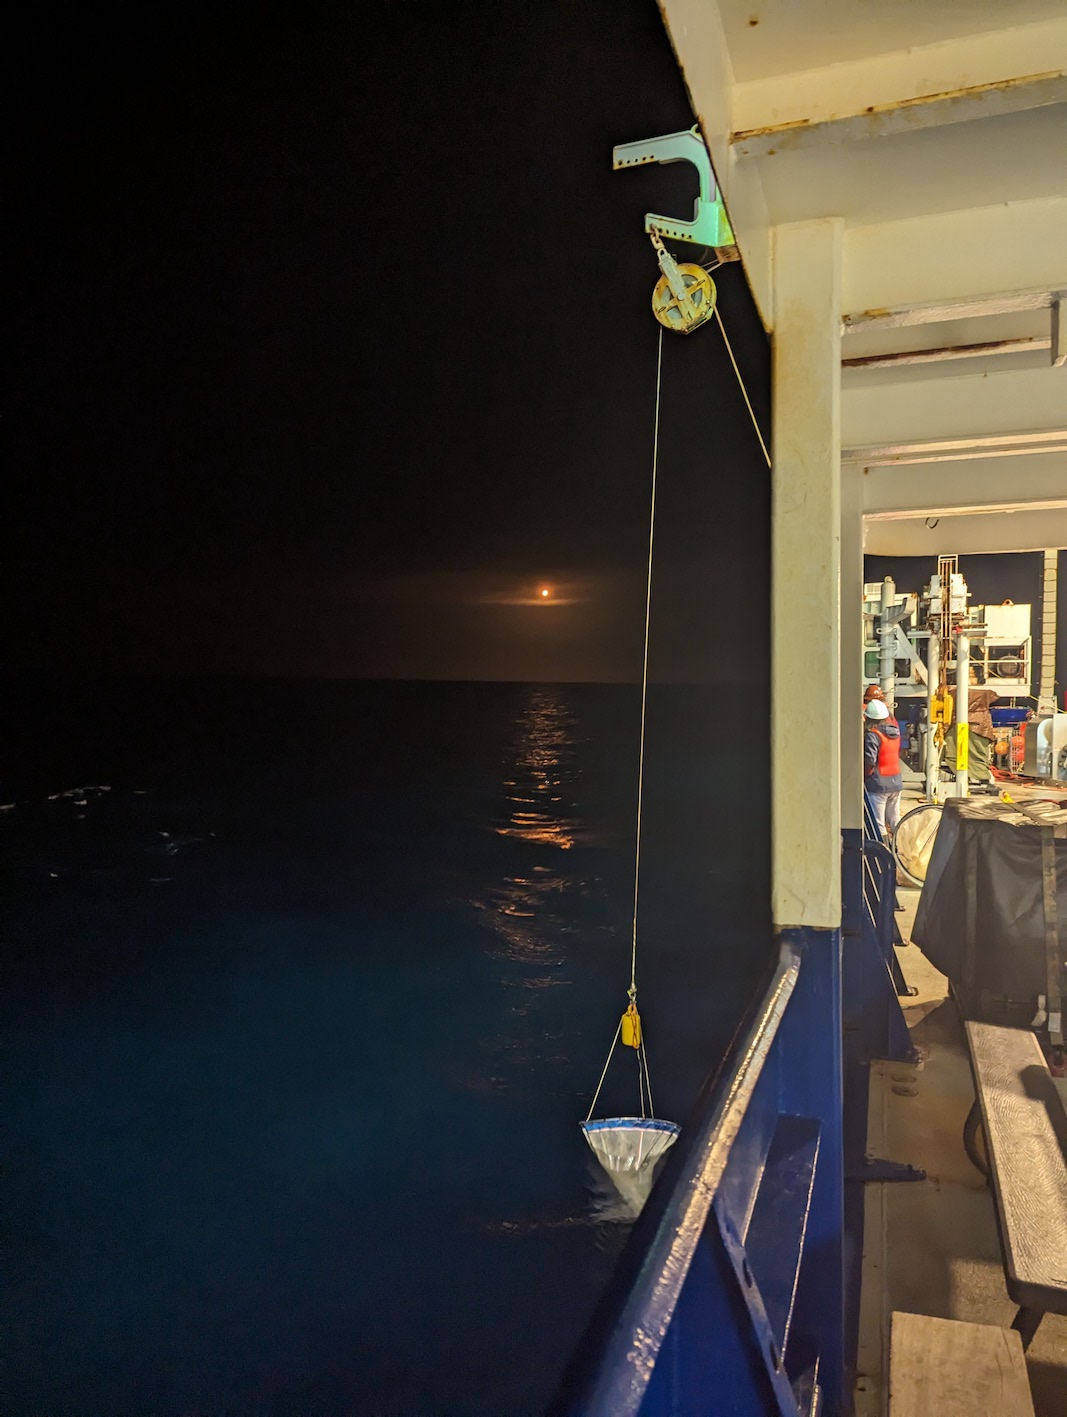 orange glow from rocket in the background, with a salp net being lowered into the ocean